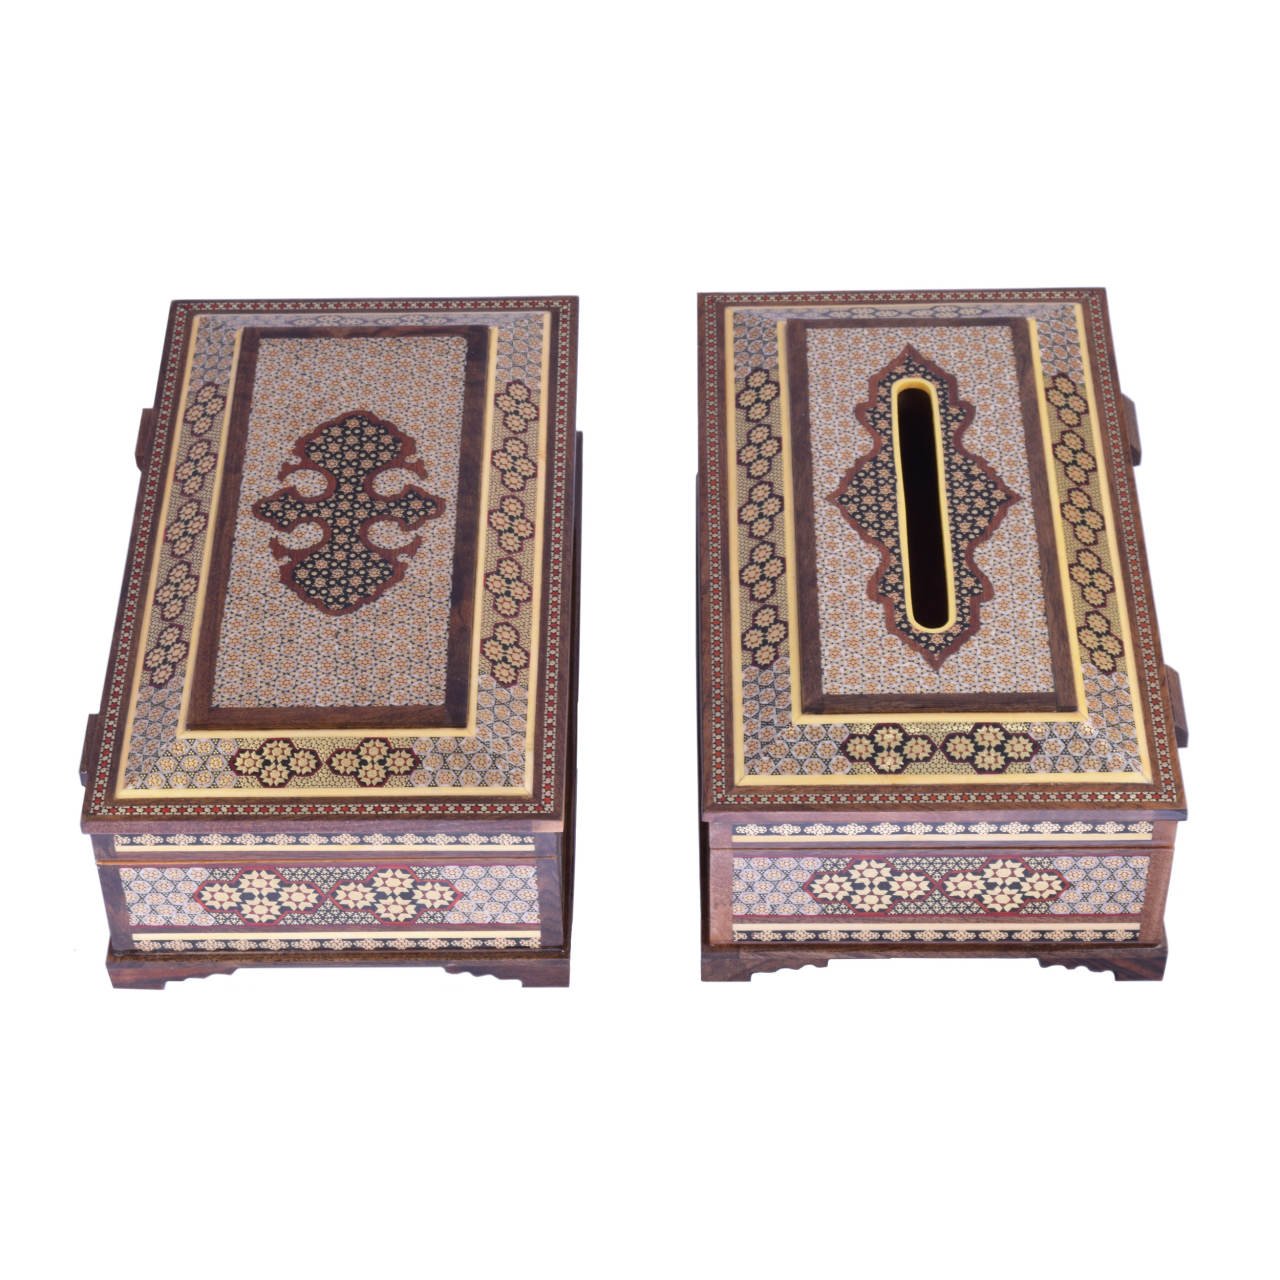 Collection of Khatam Tissue Box and box model kolbeh , Khatam Tissue, Inlaid, Khatam Tissue Box, Khatam